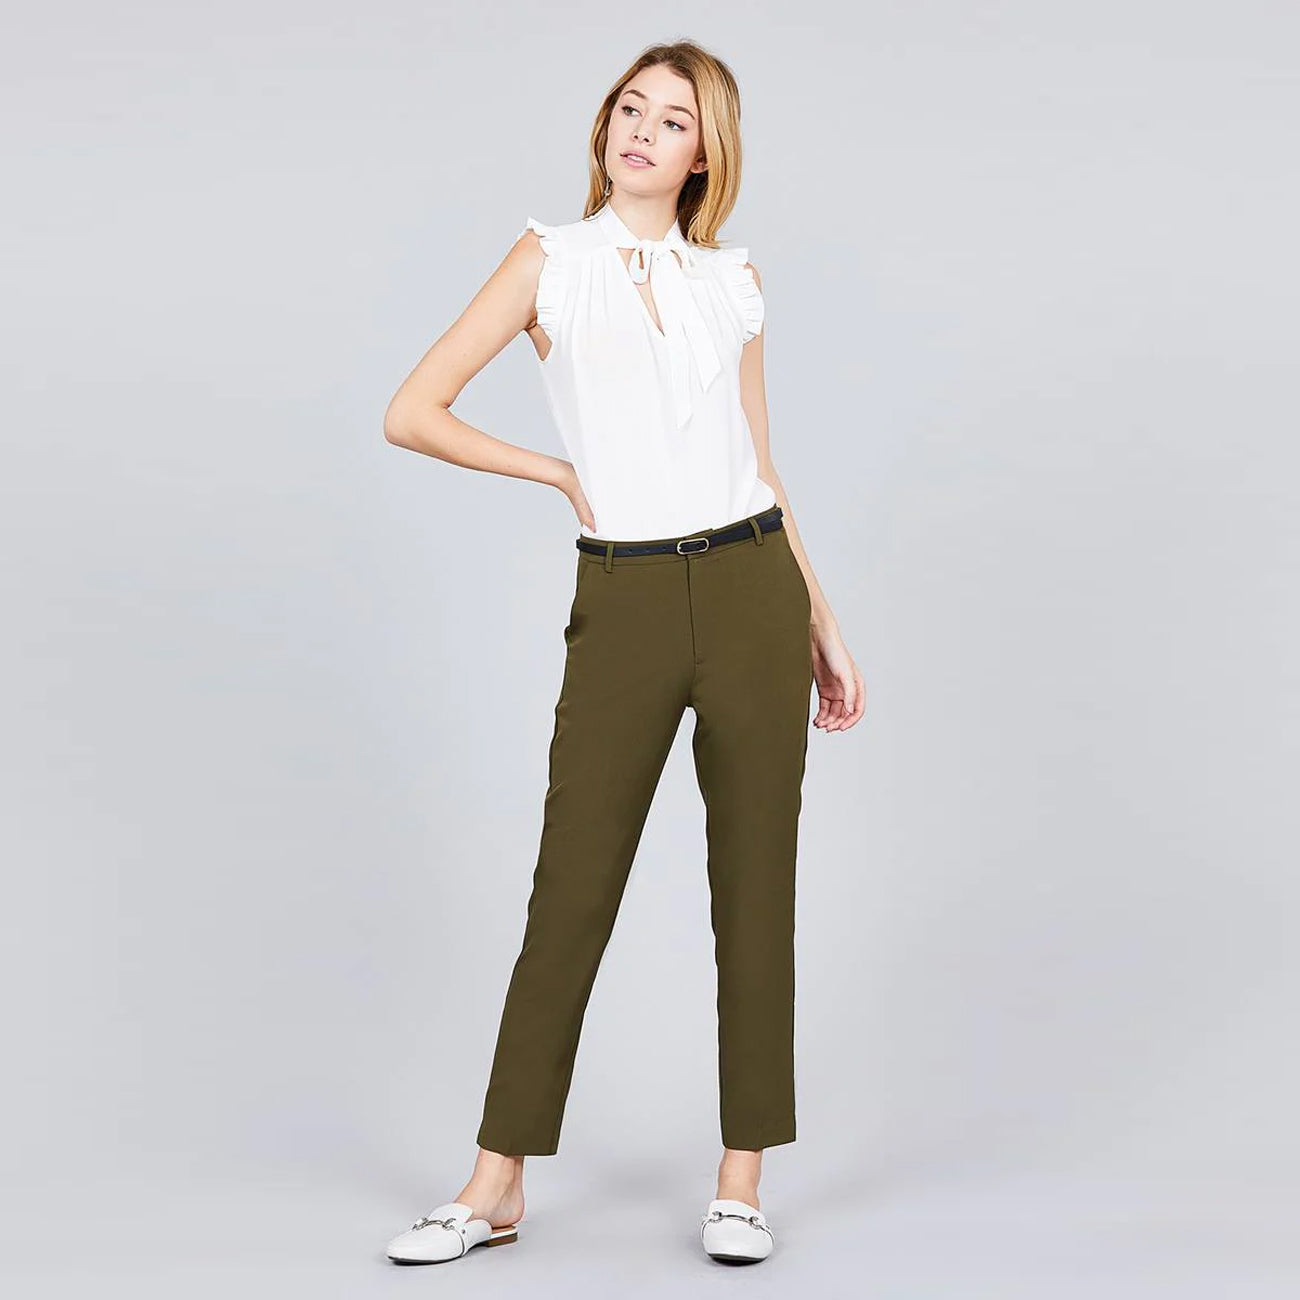 Olive Classic Woven with Belt Cropped Pants